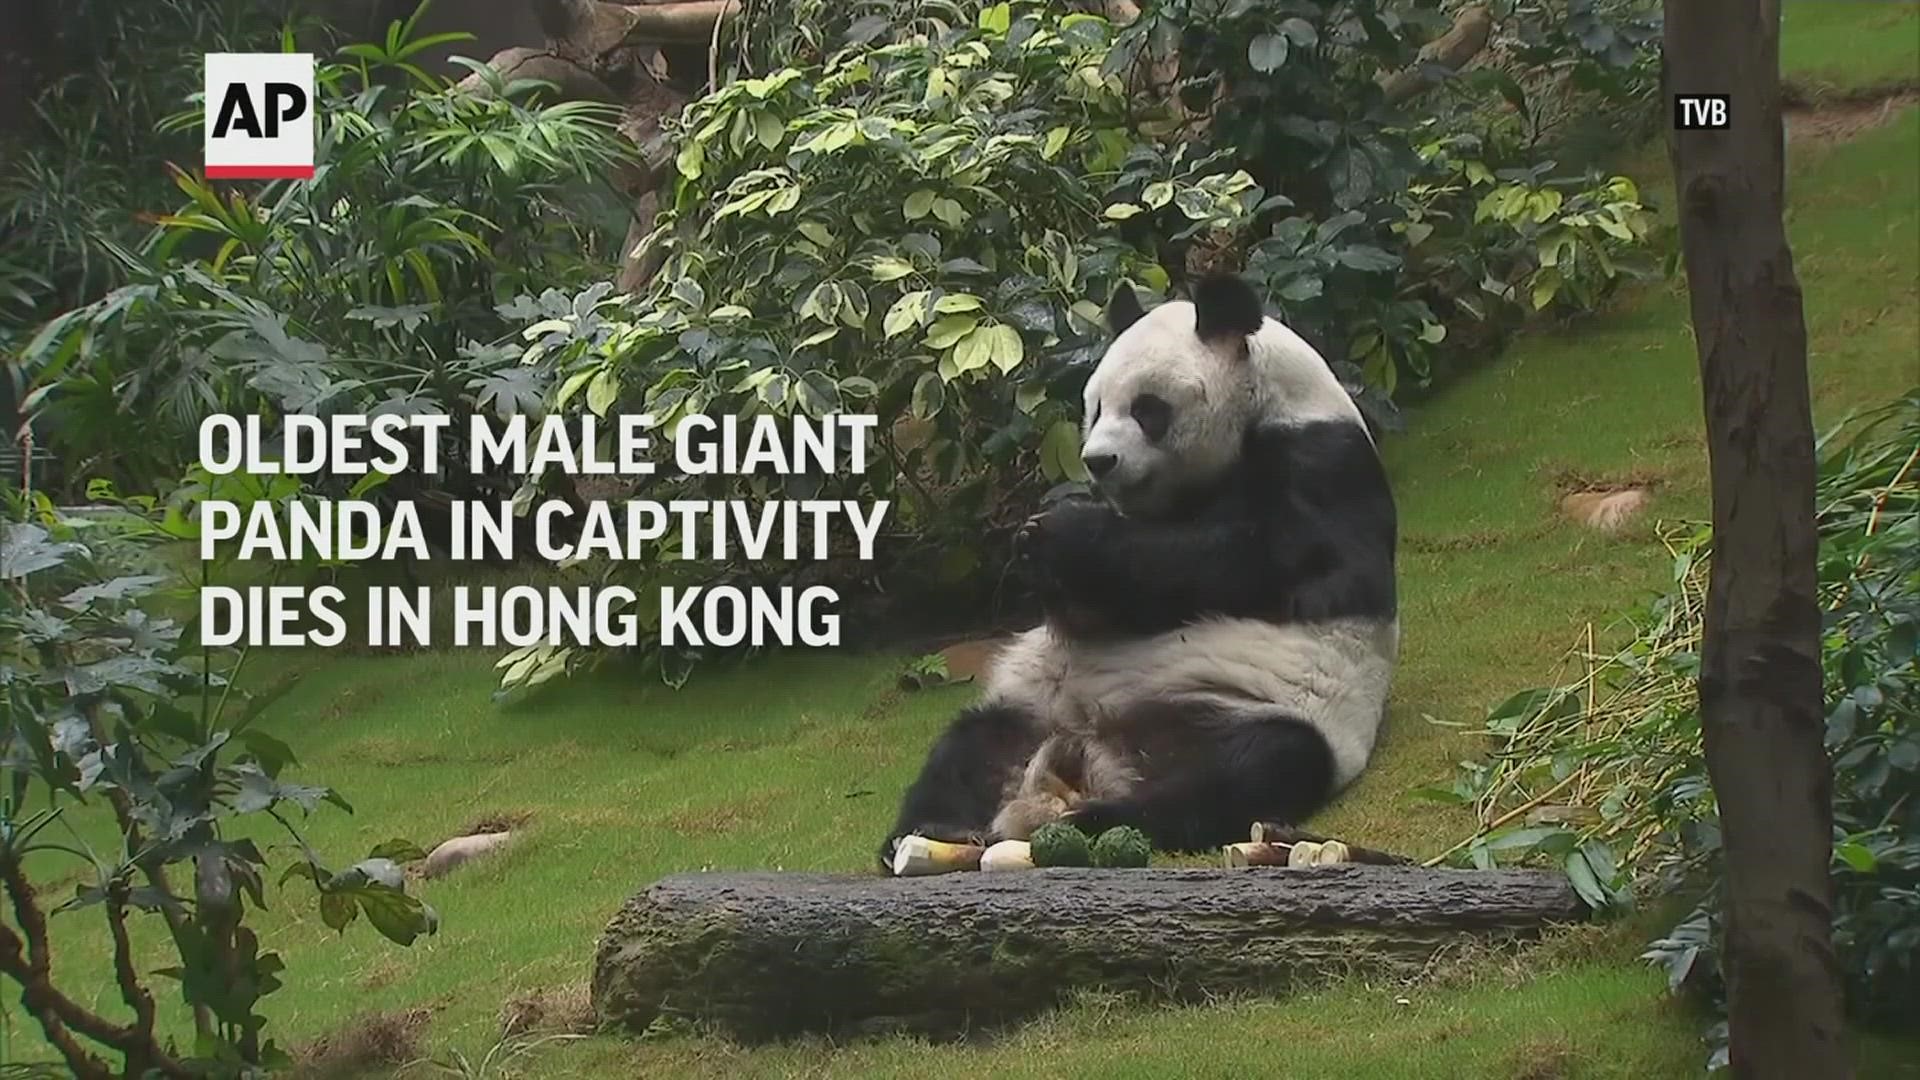 The oldest-ever male giant panda in captivity has died at age 35 at a Hong Kong theme park after his health deteriorated.